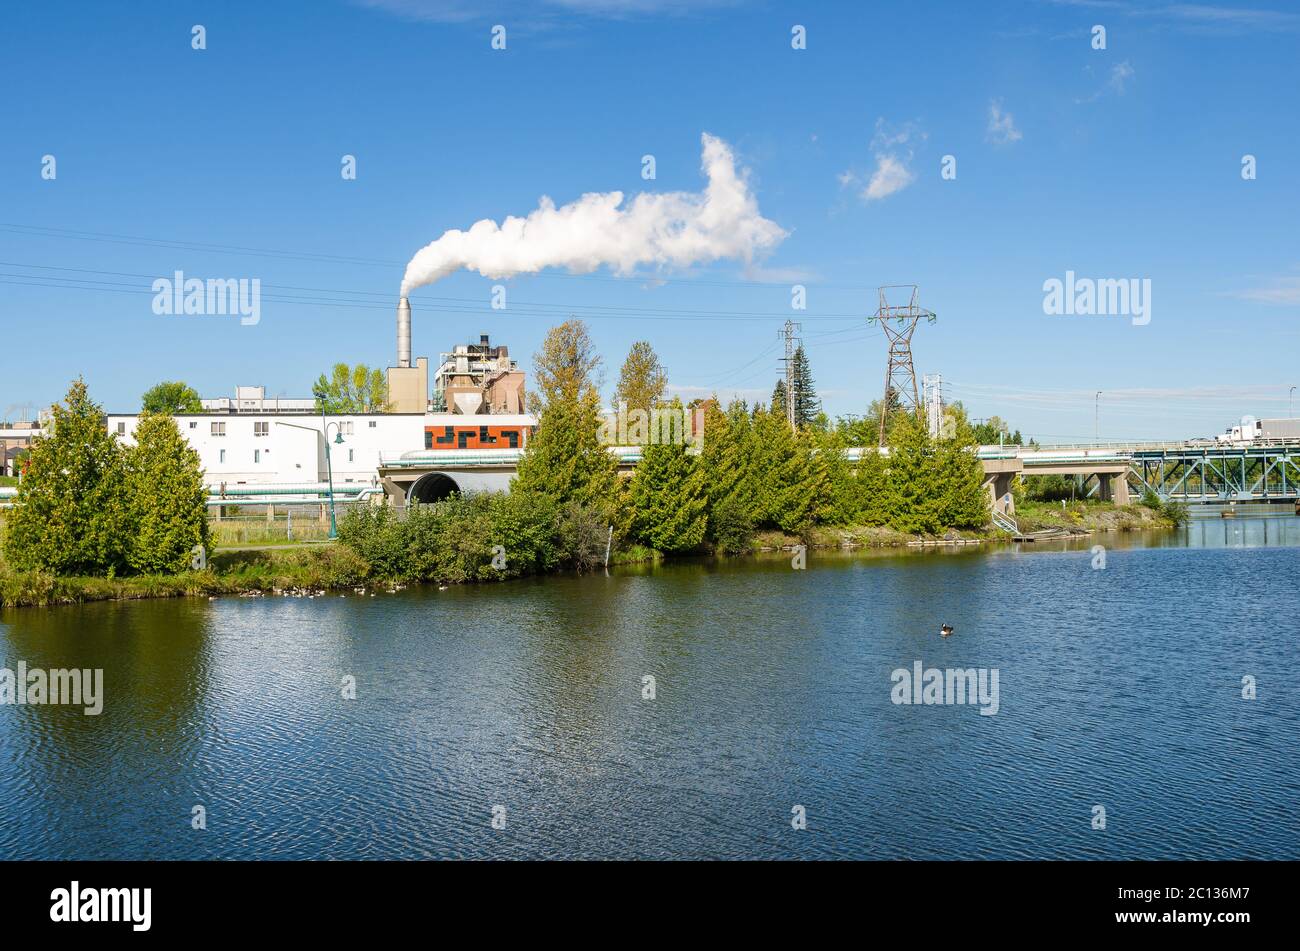 Manufacturing plant along a river on a clear early autumn day Stock Photo